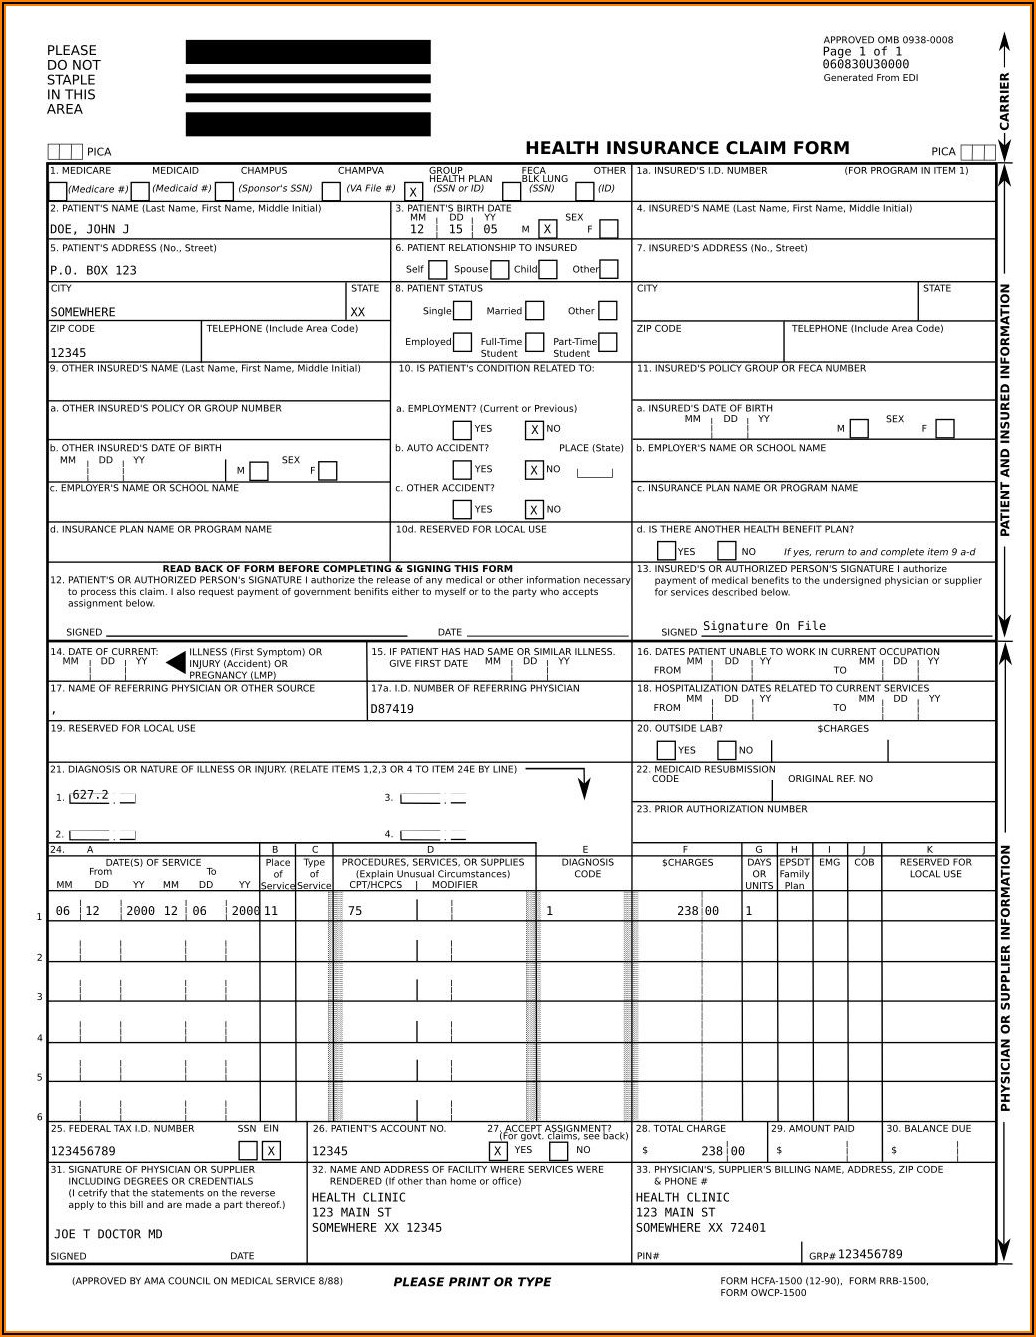 Cms 1500 Fillable Form